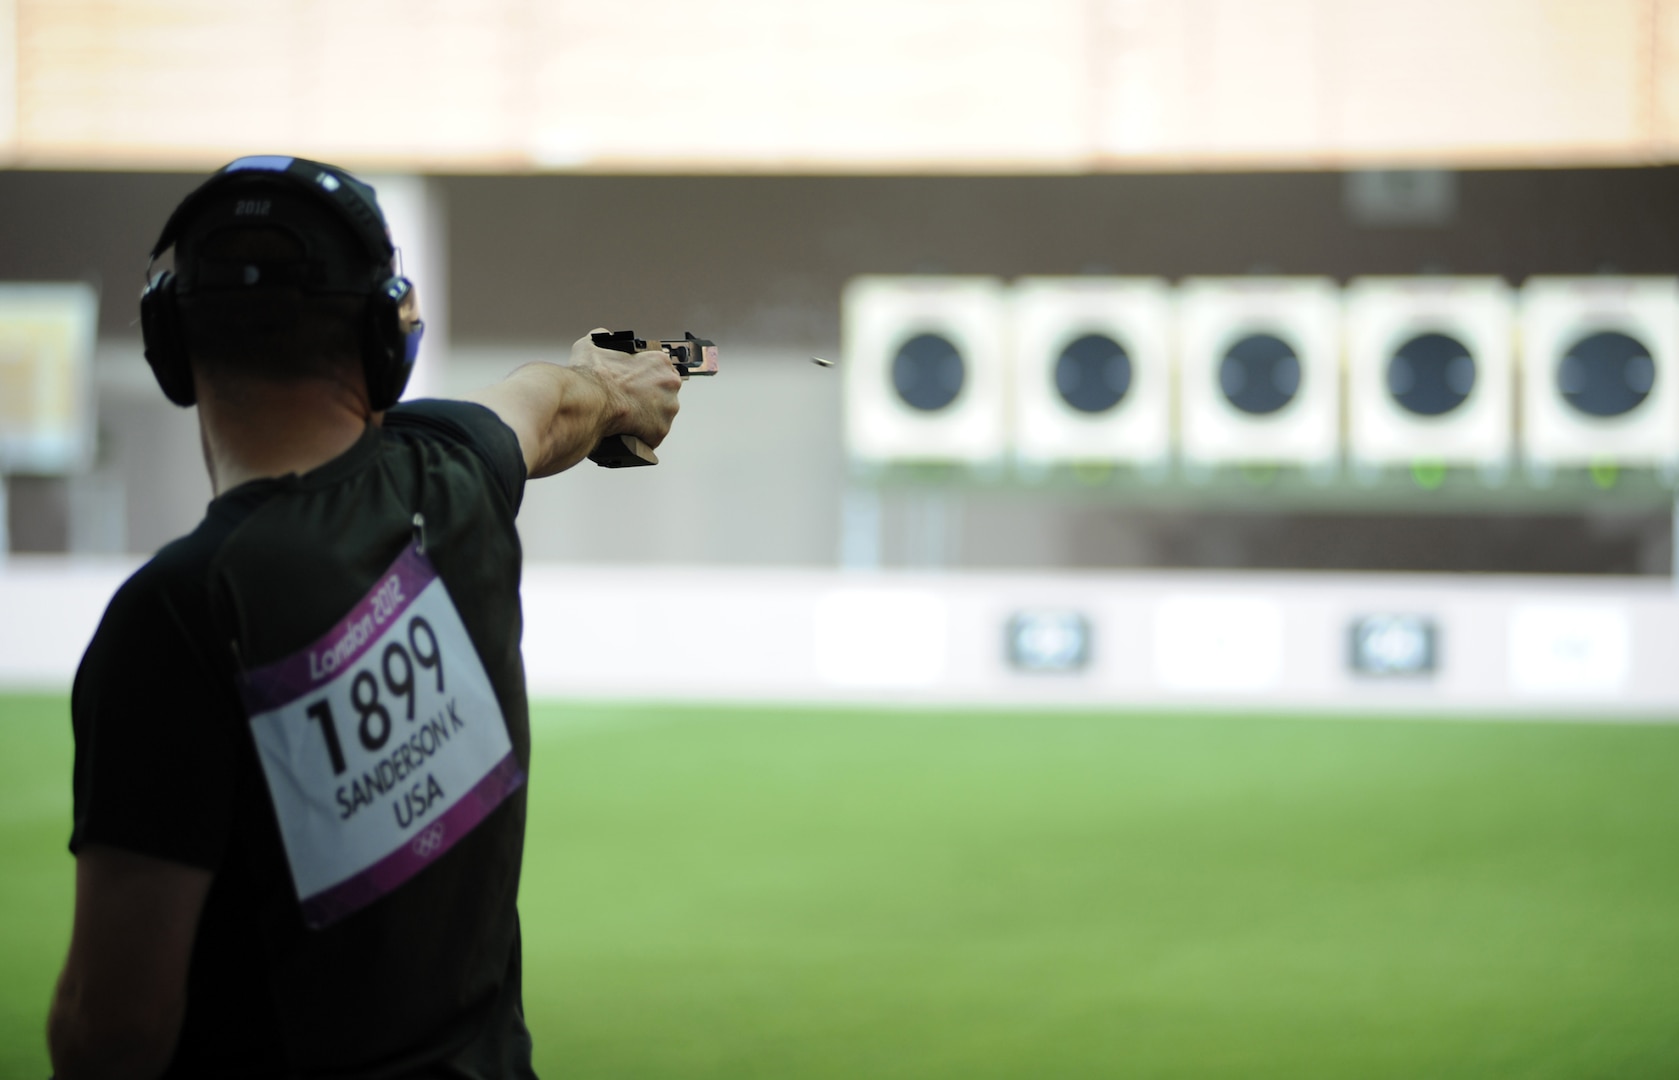 U.S. Army World Class Athlete Program marksman SFC Keith Sanderson shoots into 14th place with a score of 288 in stage one qualification of the Olympic men's 25-meter rapid fire pistol event Aug. 2 at the Royal Artillery Barracks in London. U.S. Army photo by Tim Hipps, IMCOM Public Affairs